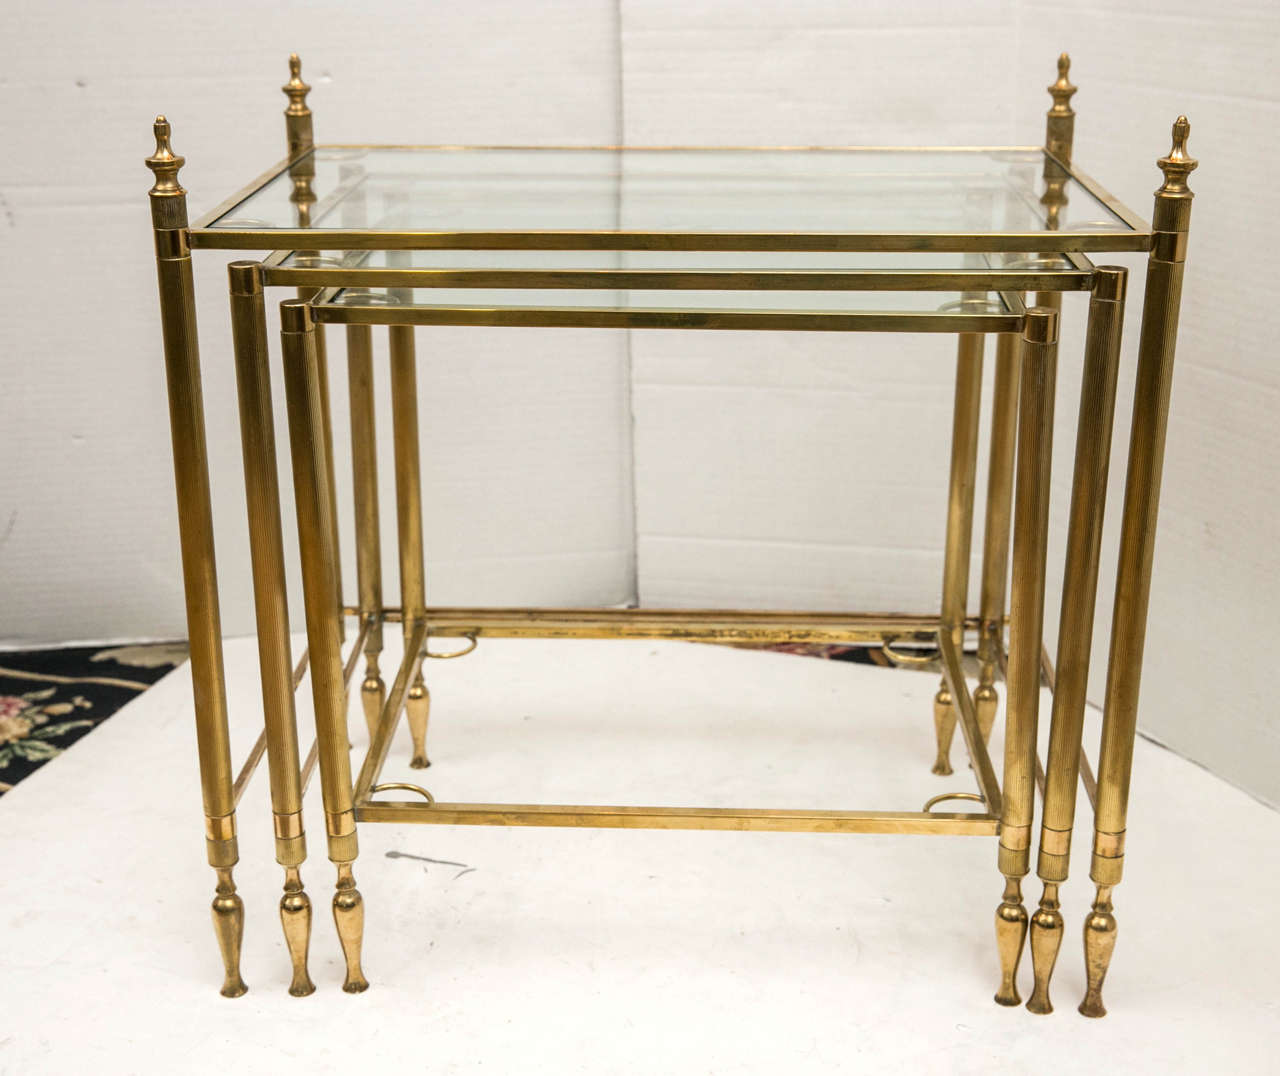 A set of three polished brass frame nesting tables with glass tops. The smallest table has a lower glass shelf.